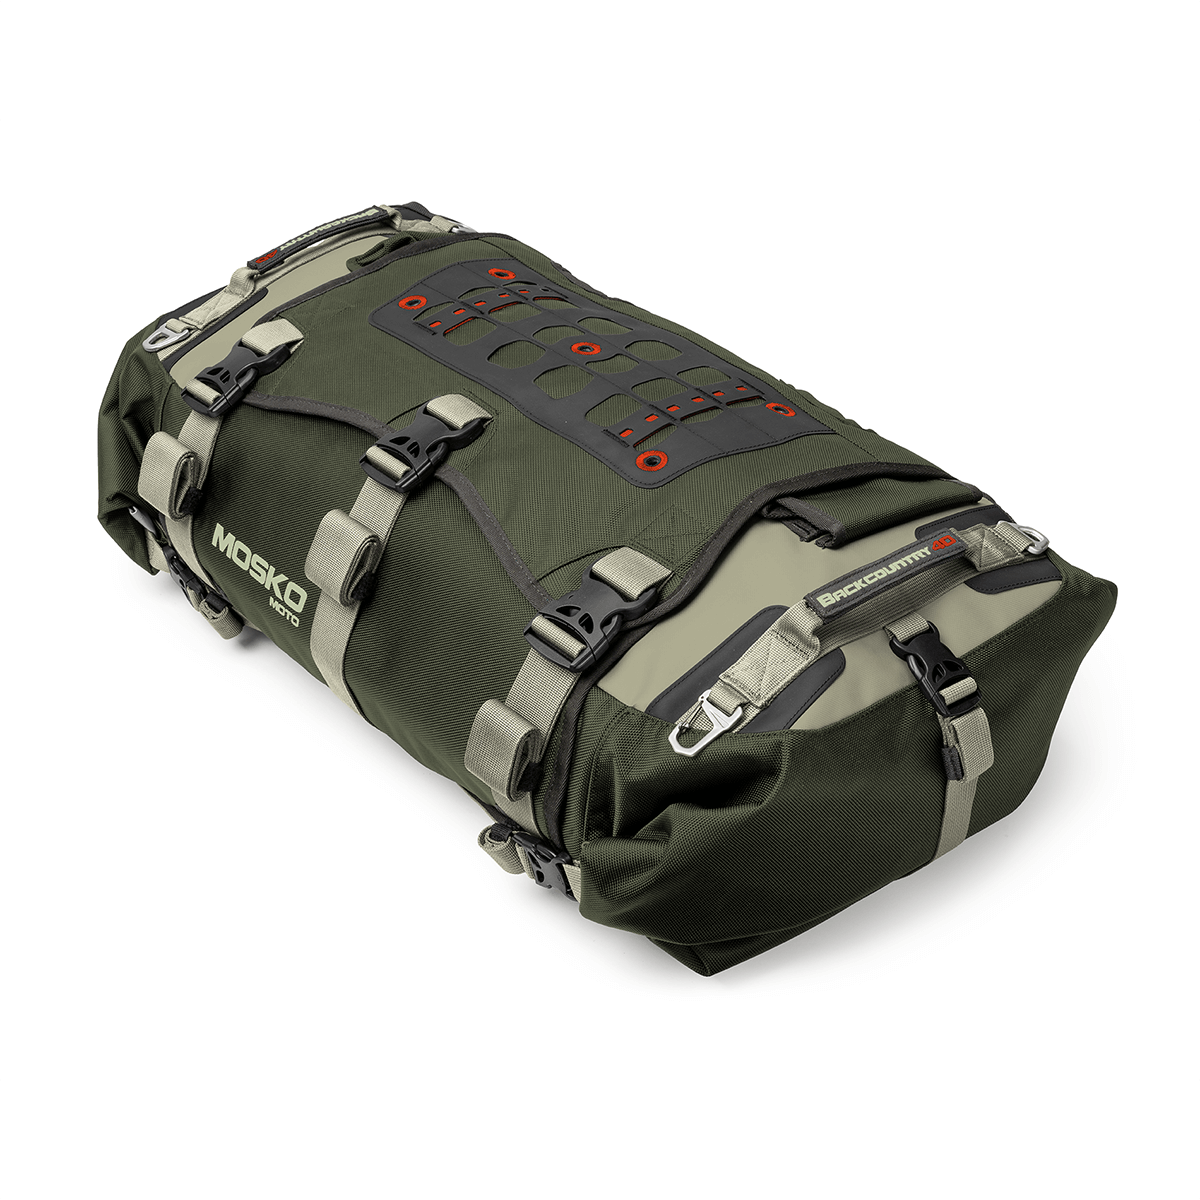 Mosko Moto Duffle WOODLAND / WITHOUT CINCH STRAPS Backcountry 40L Duffle/Pack (V2.0)